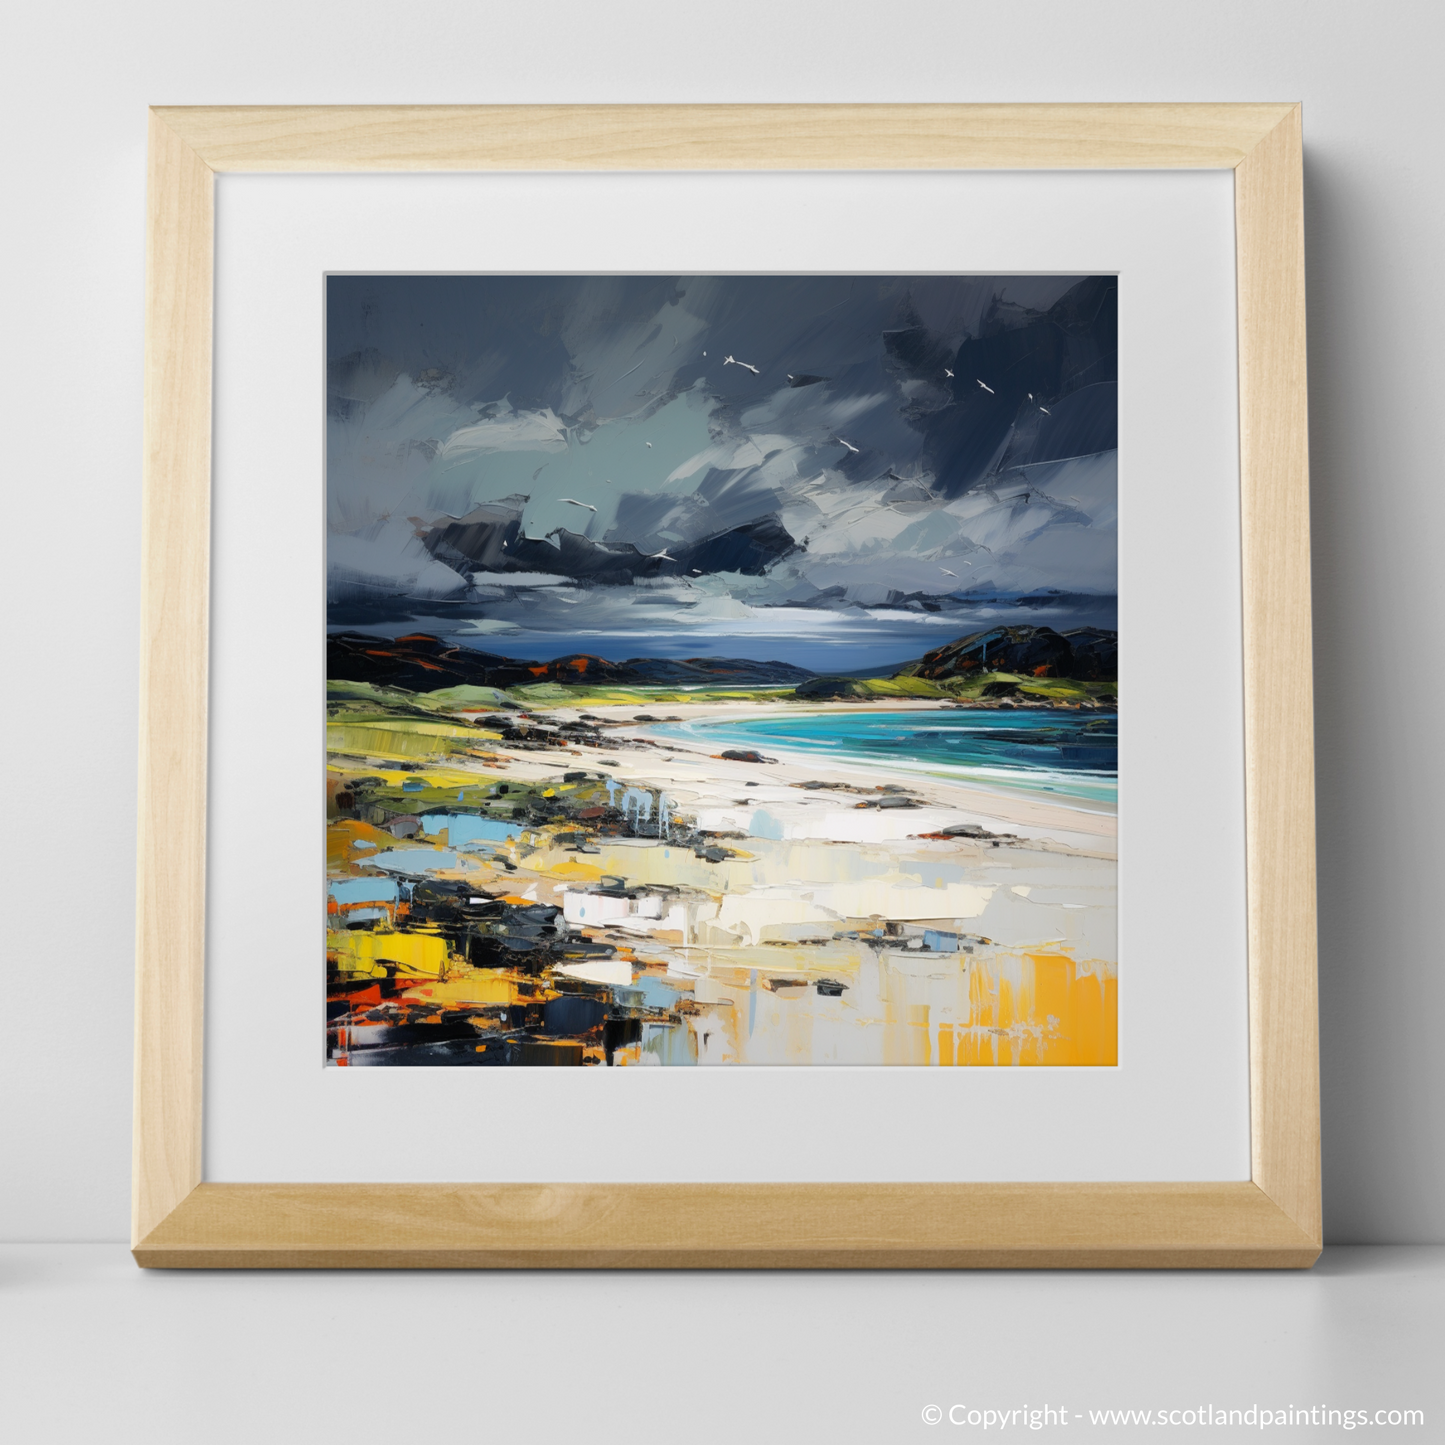 Art Print of Arisaig Beach with a stormy sky with a natural frame